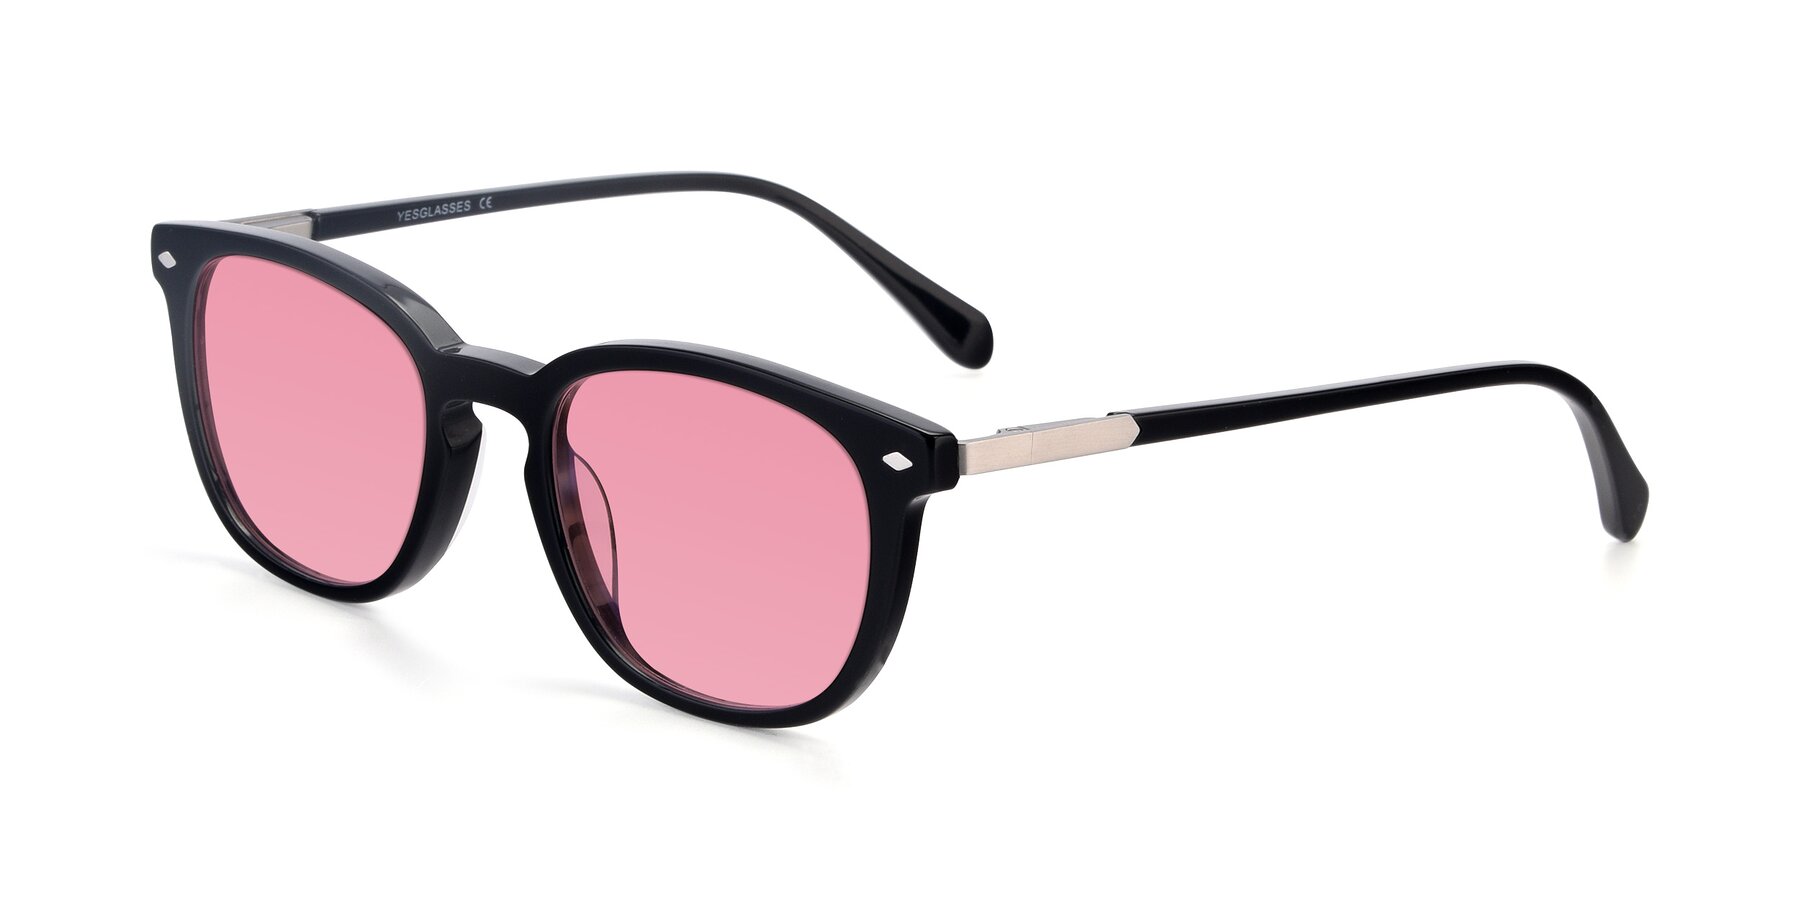 Angle of 17578 in Black with Pink Tinted Lenses